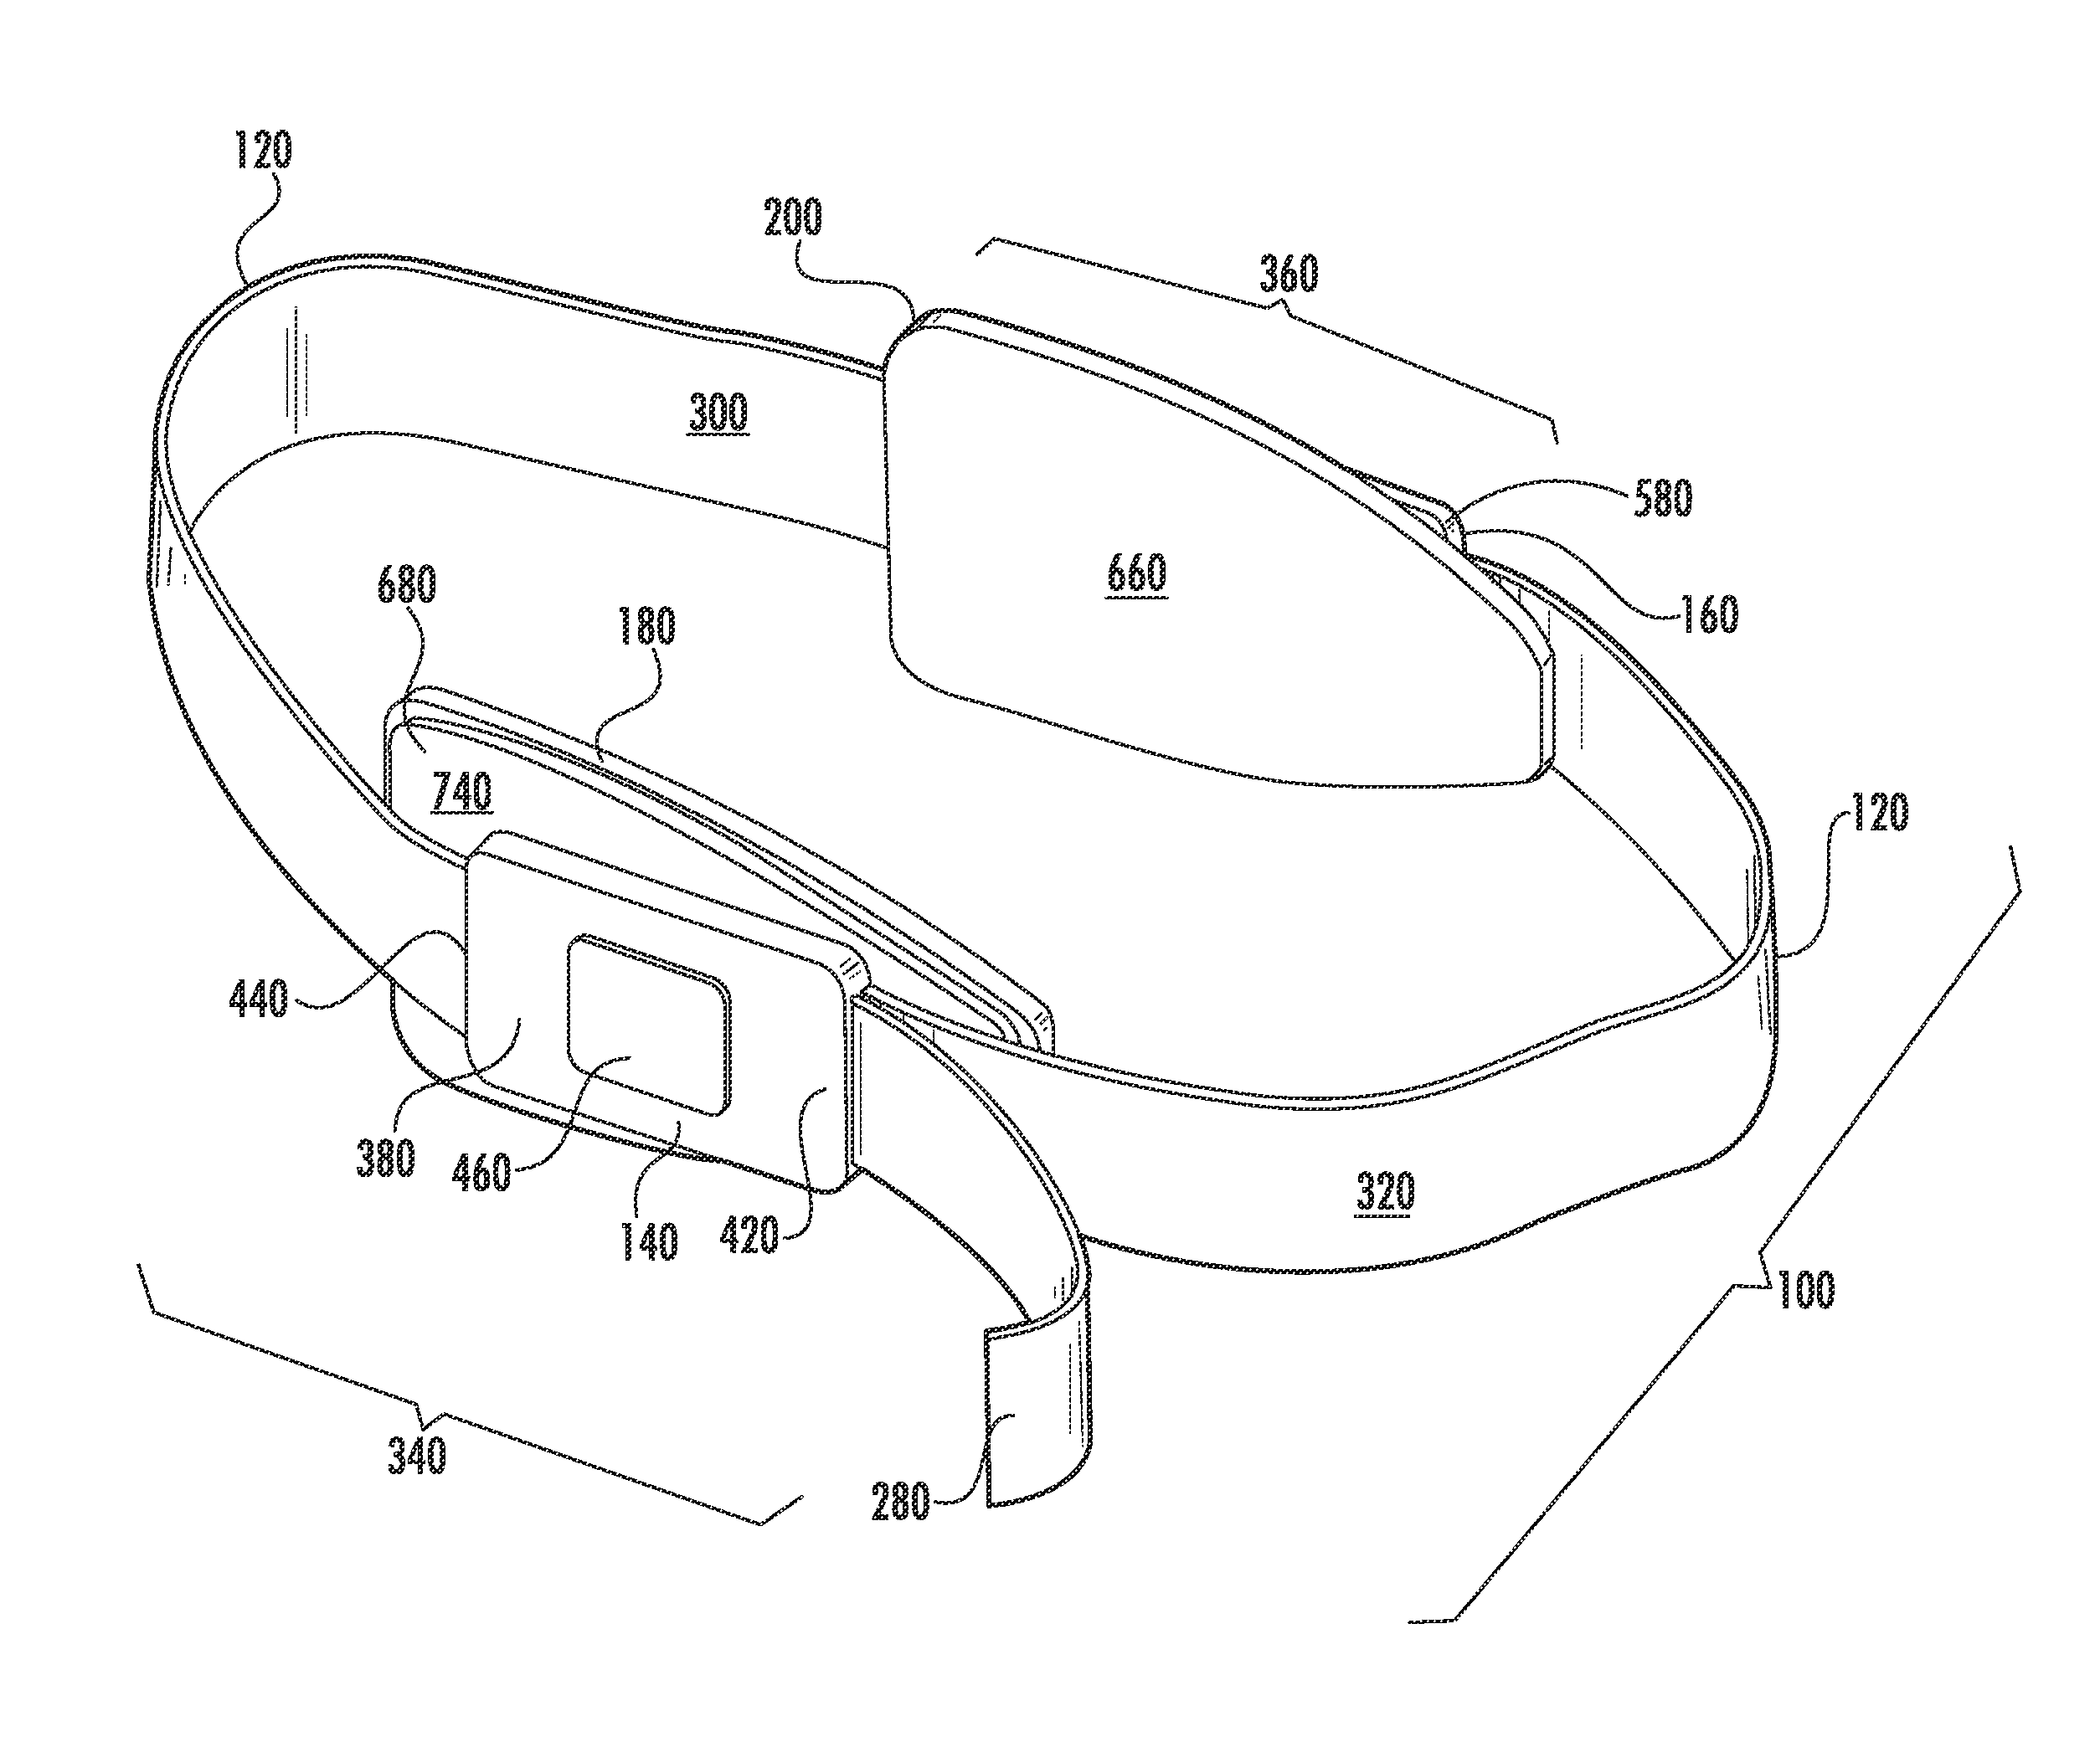 Method and apparatus to relieve menstrual pain